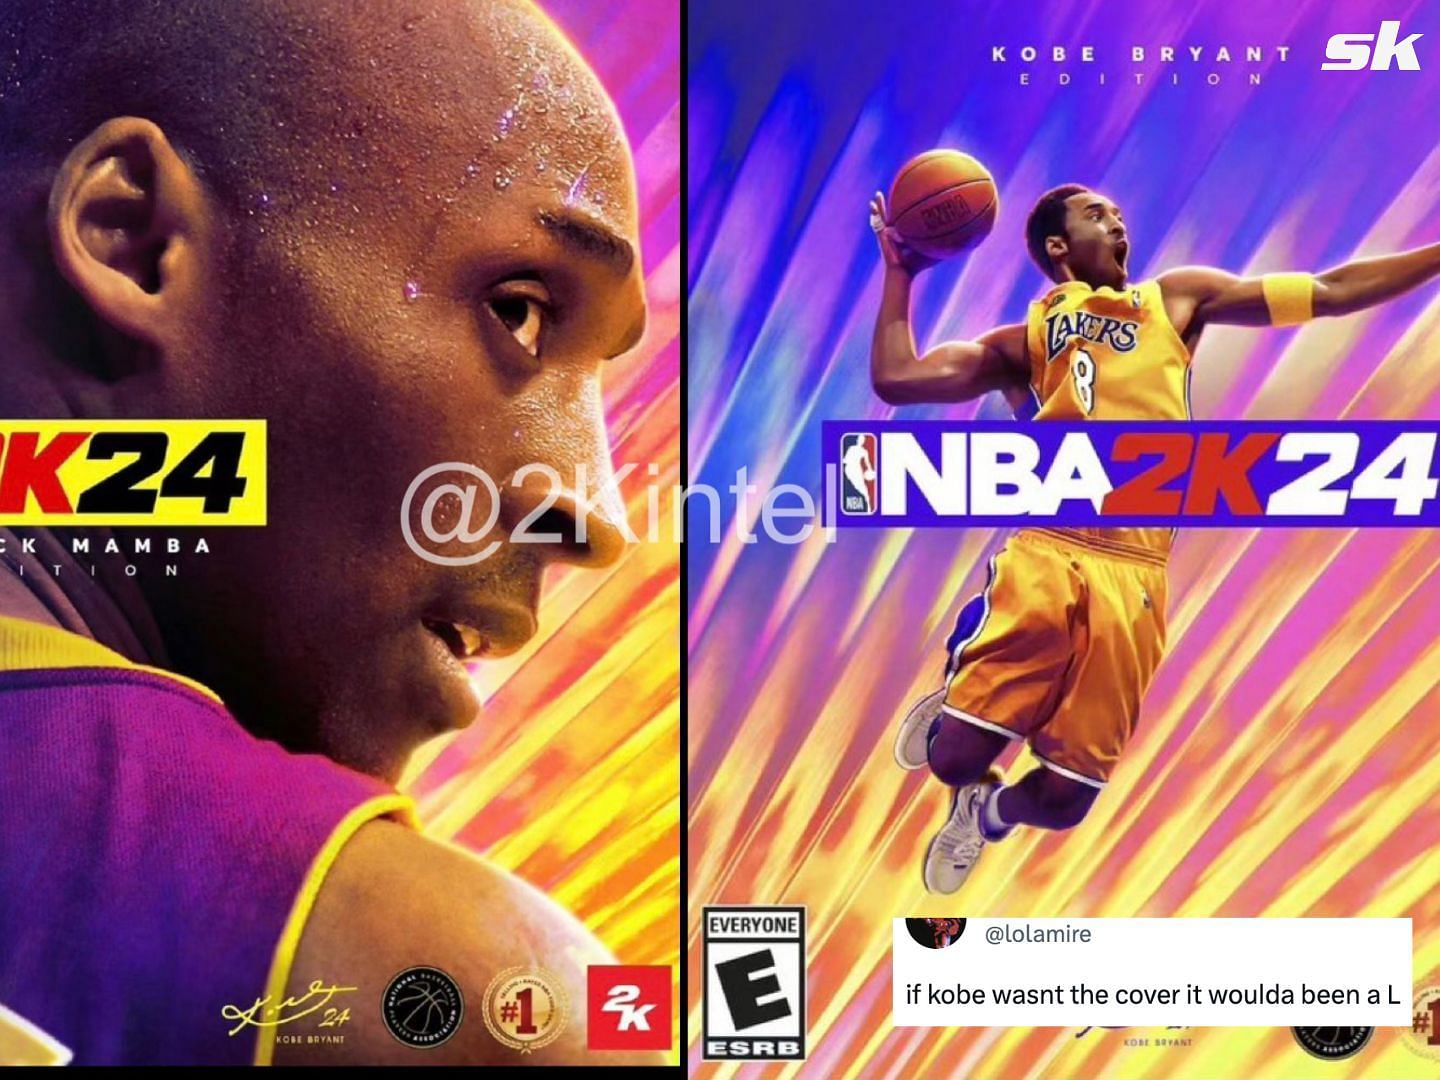 Fans are buzzed as leaked images show Kobe Bryant on 2K Cover